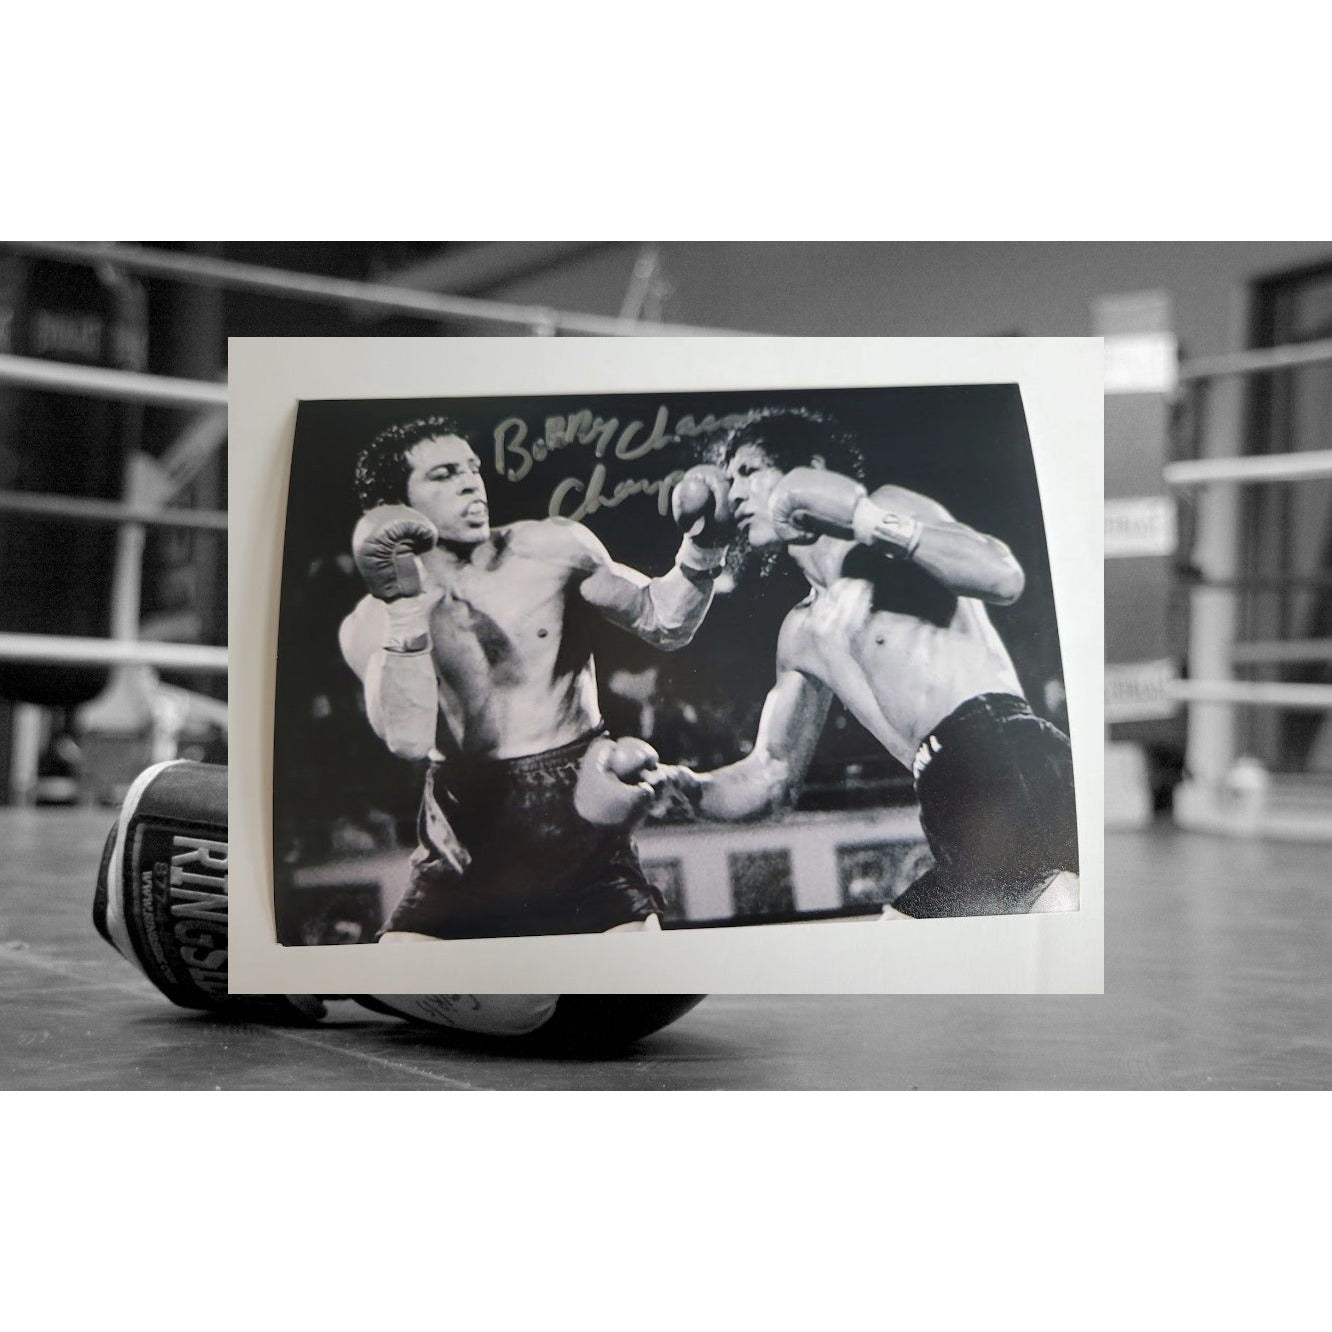 Bobby Chacon 5 x 7 photograph signed